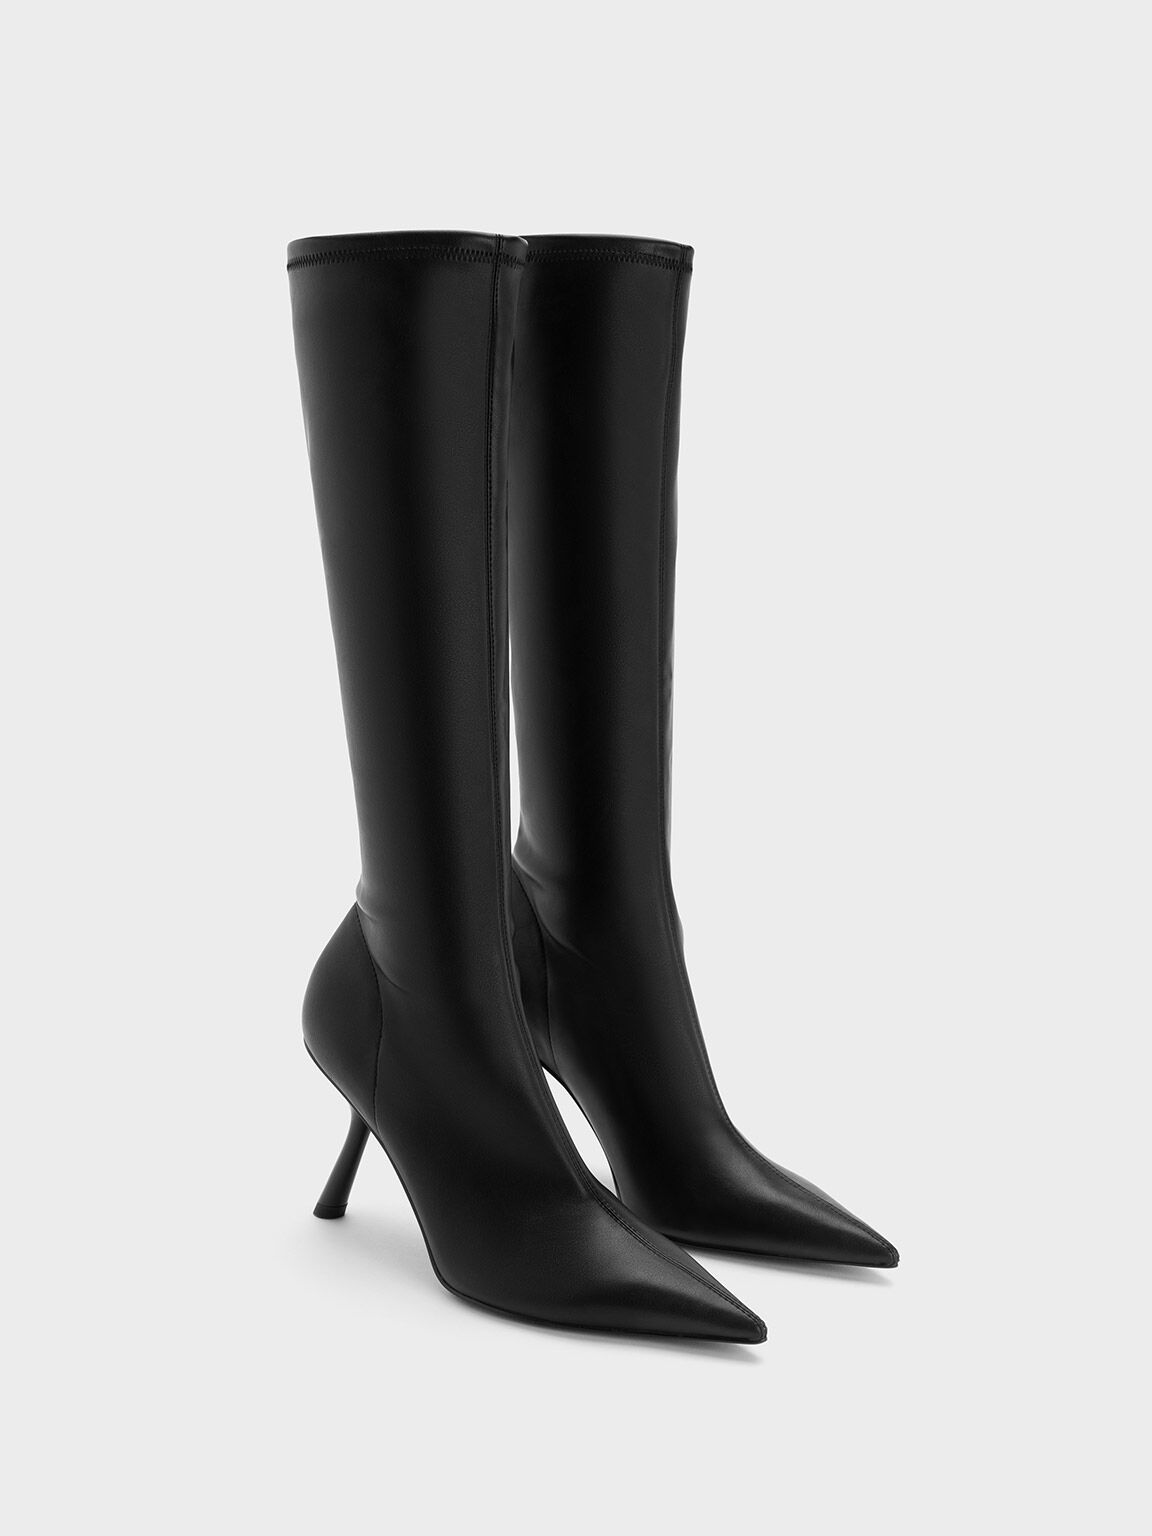 Lace up Knee-High Wedge Heel Boots Low or Tall